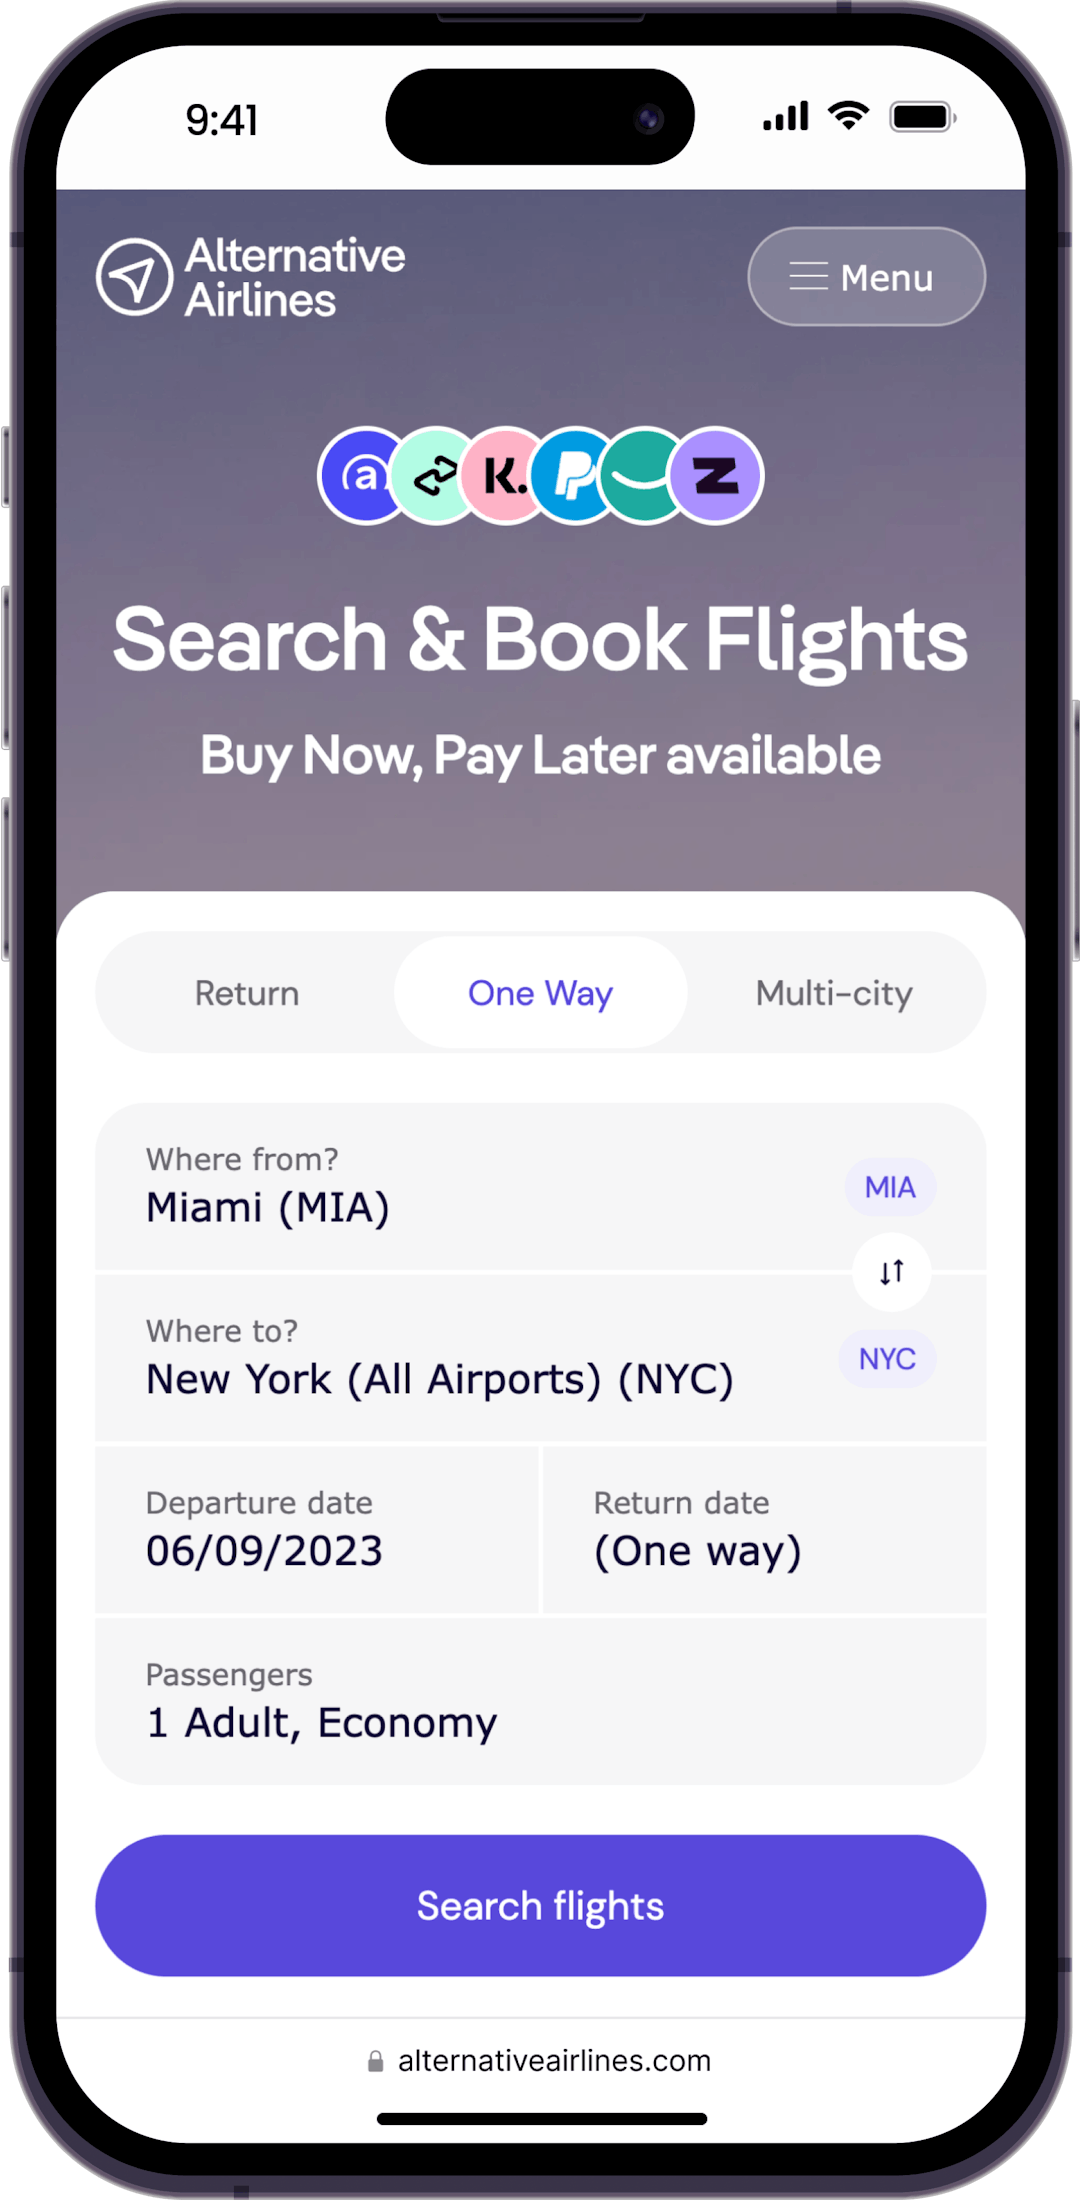 Step 1 - Search for One-Way Flights